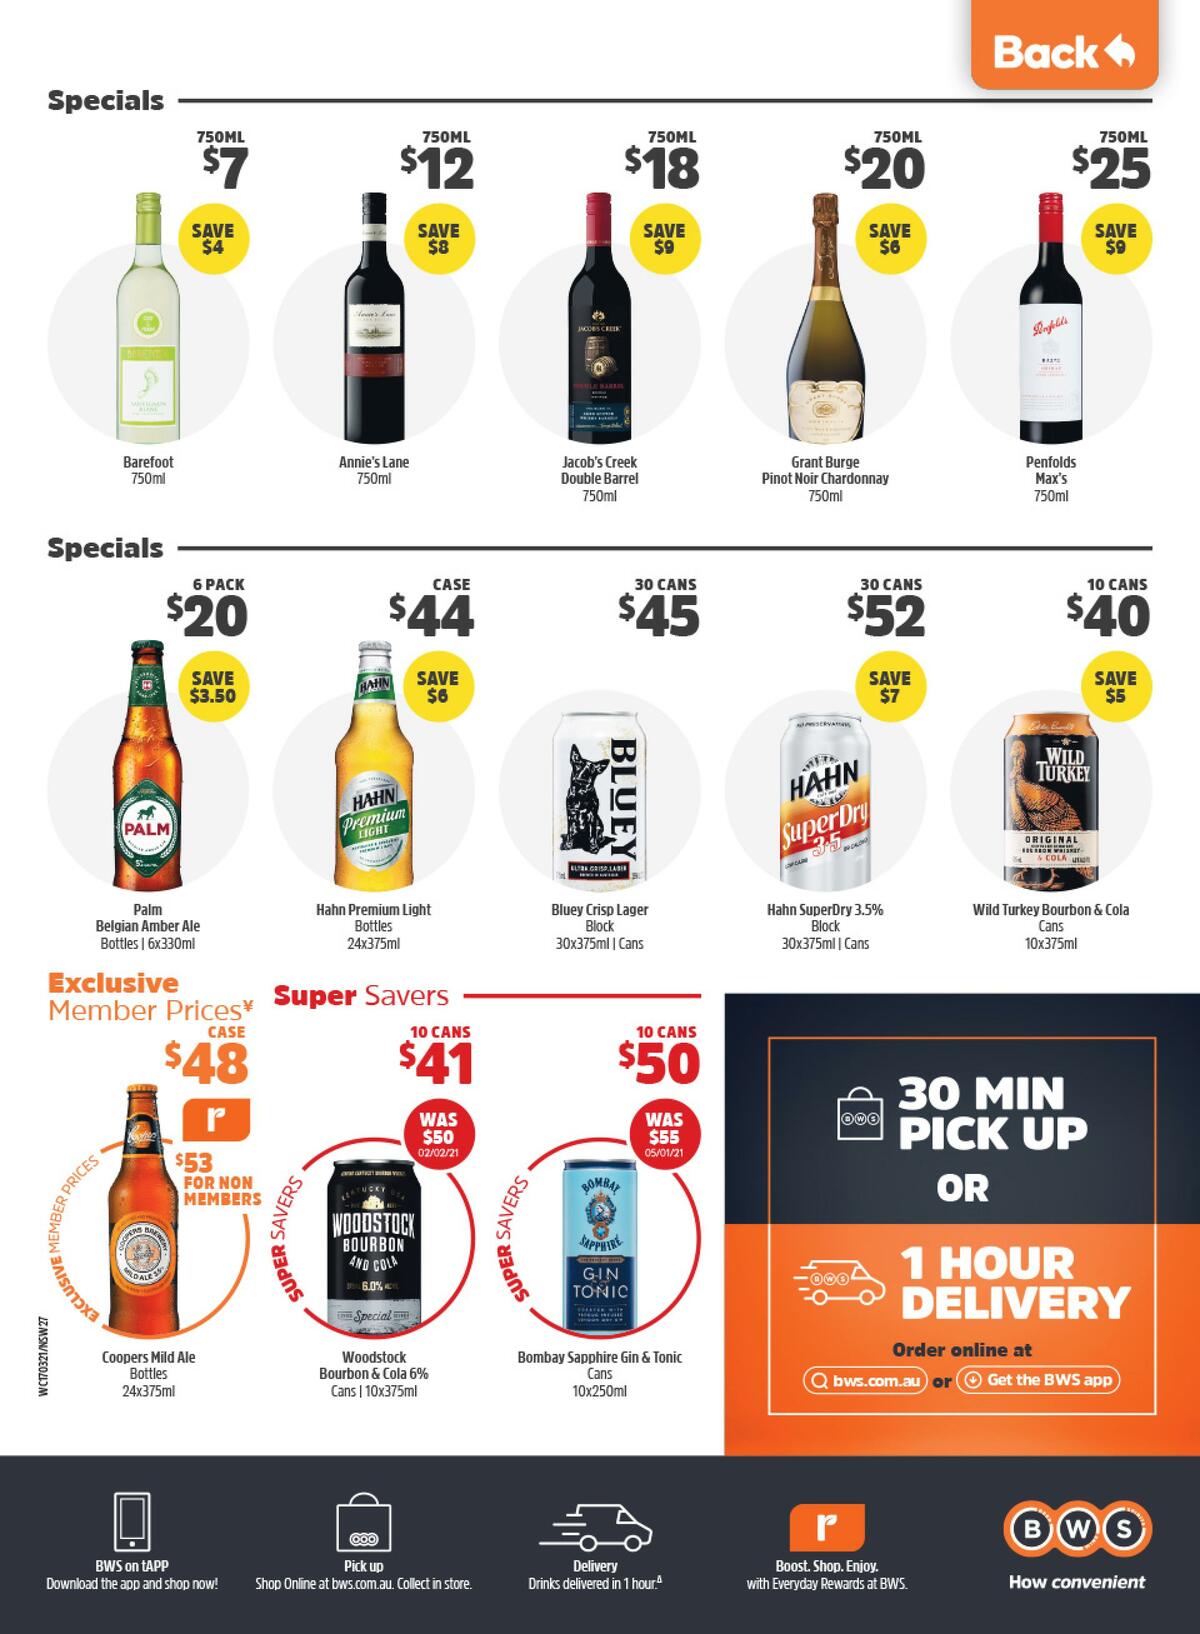 Woolworths Catalogues from 17 March